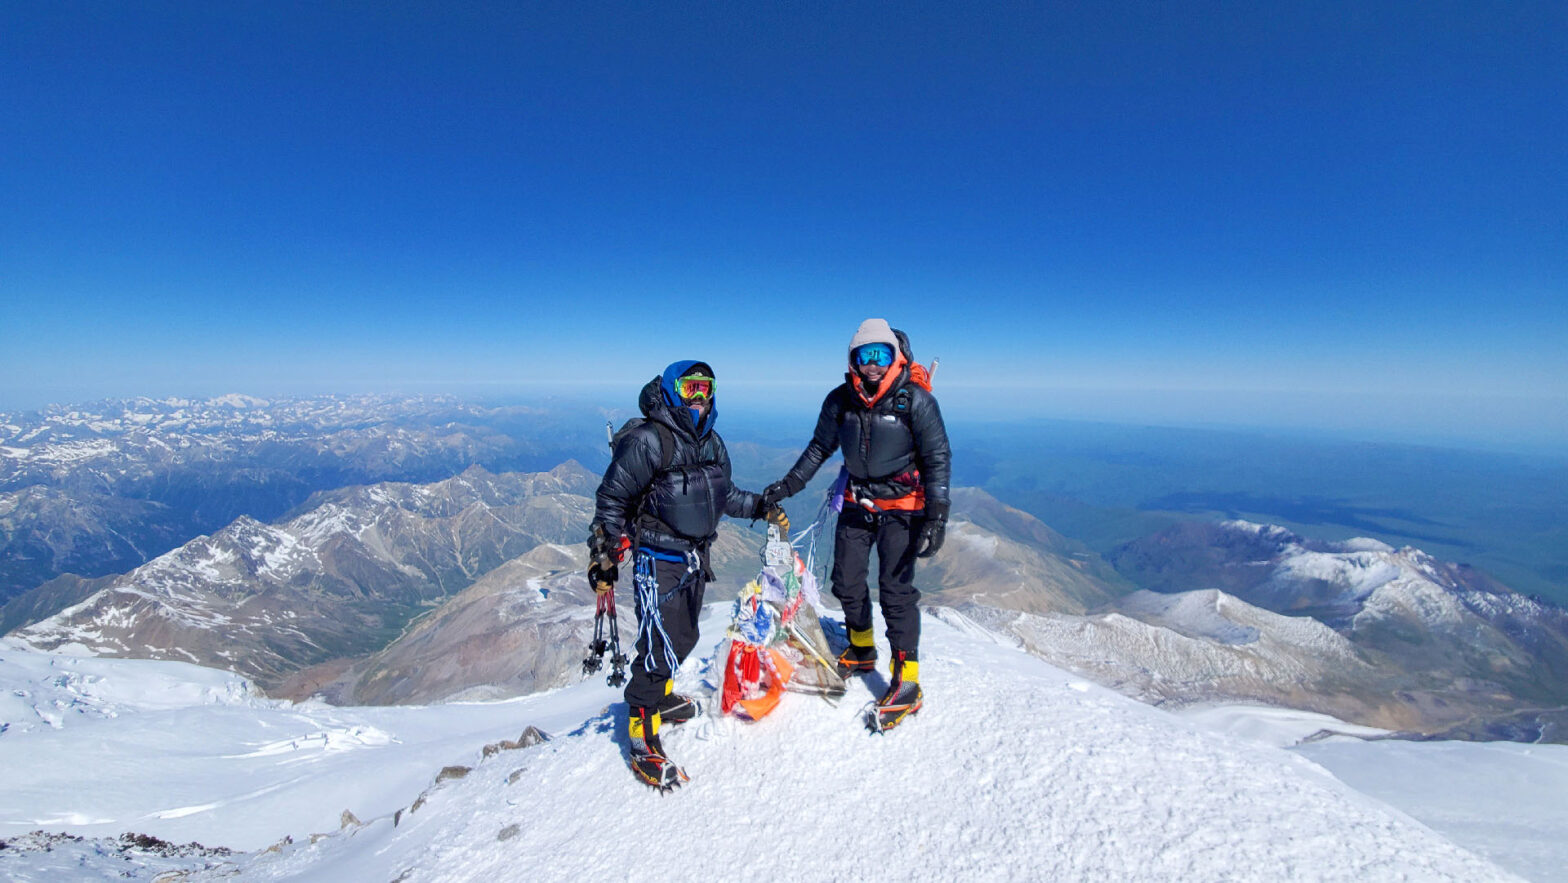 K2 Standing at the summit of Mt. Elbrus